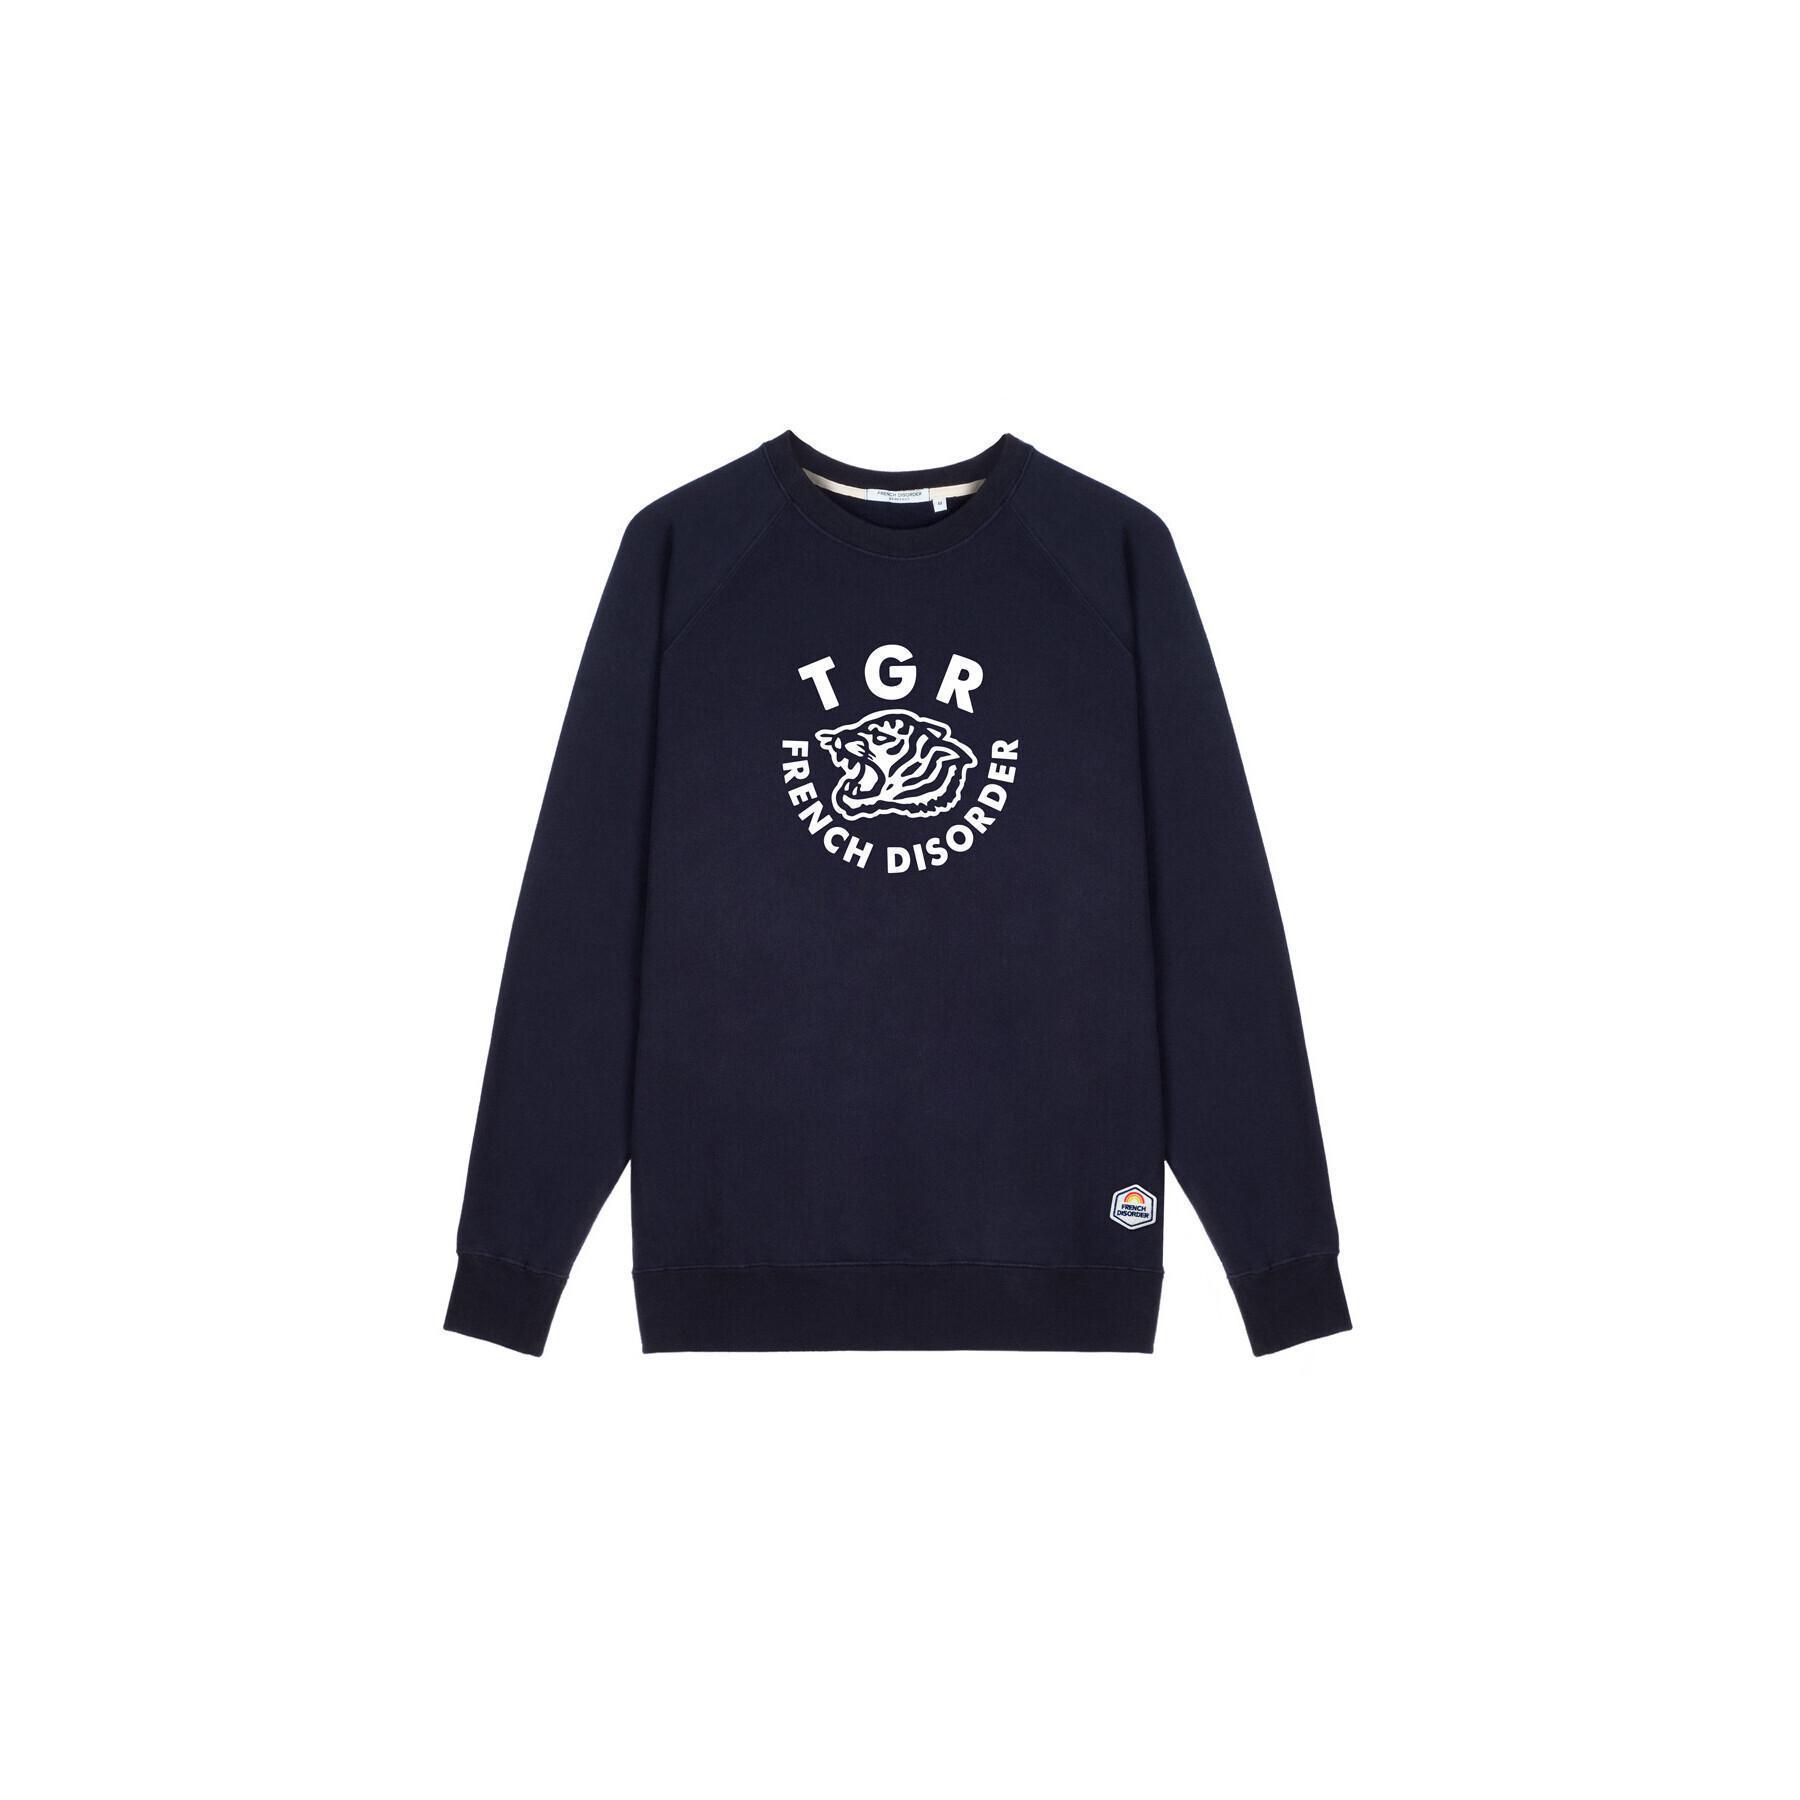 Sweatshirt French Disorder Clyde Tiger